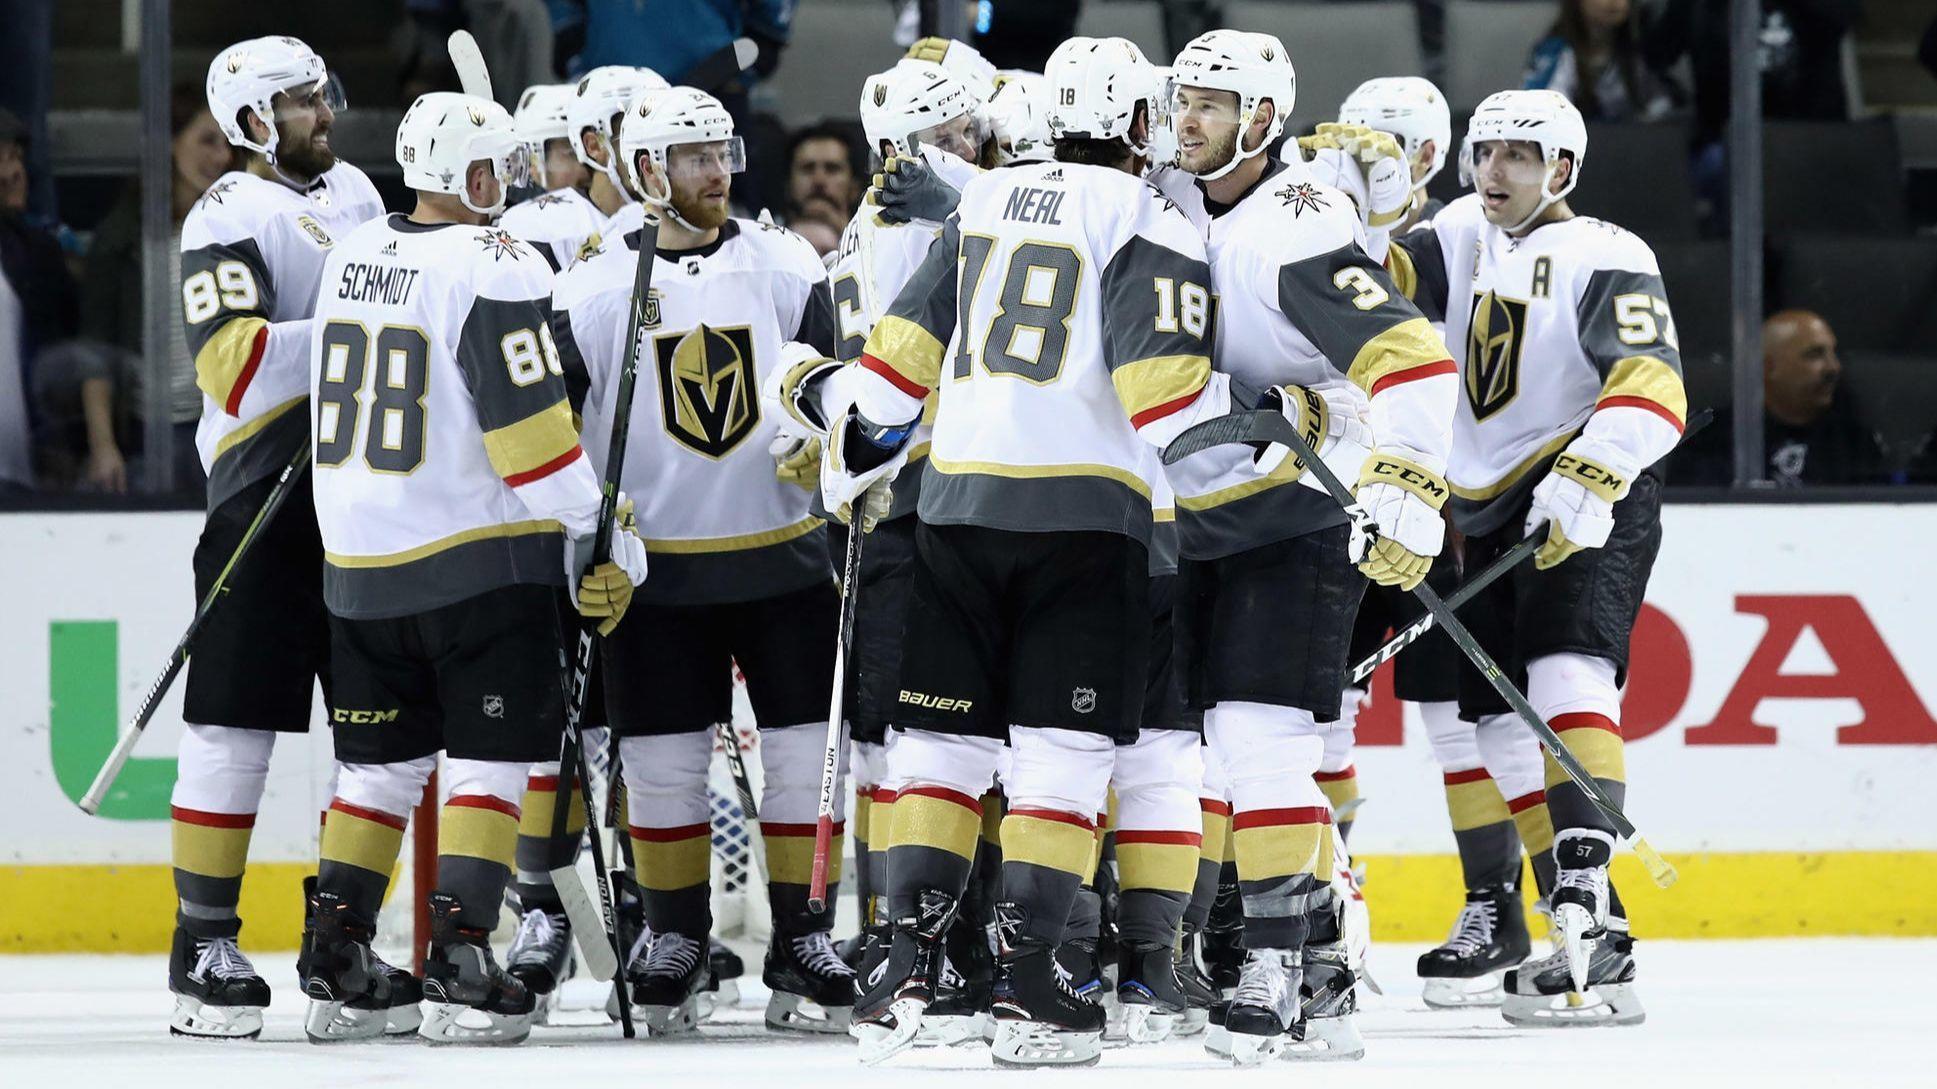 Expansion Golden Knights top Sharks to make conference final